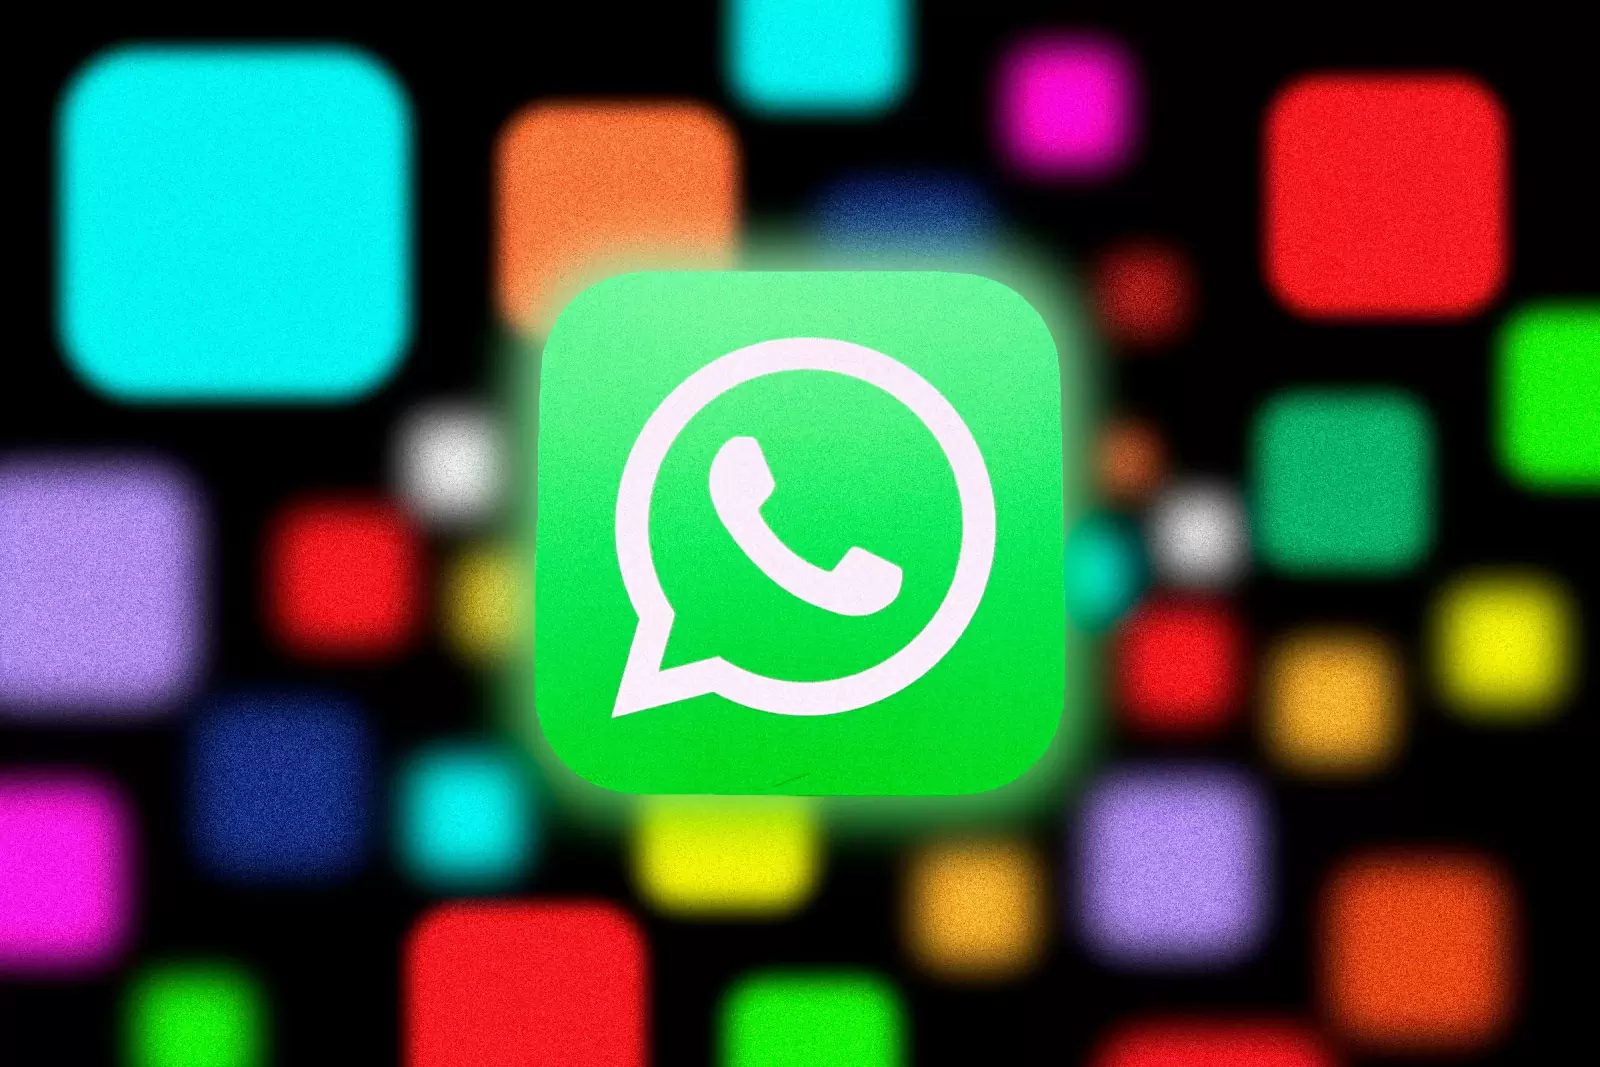 Big feature is coming in WhatsApp, you will be able to send messages from this app to other apps